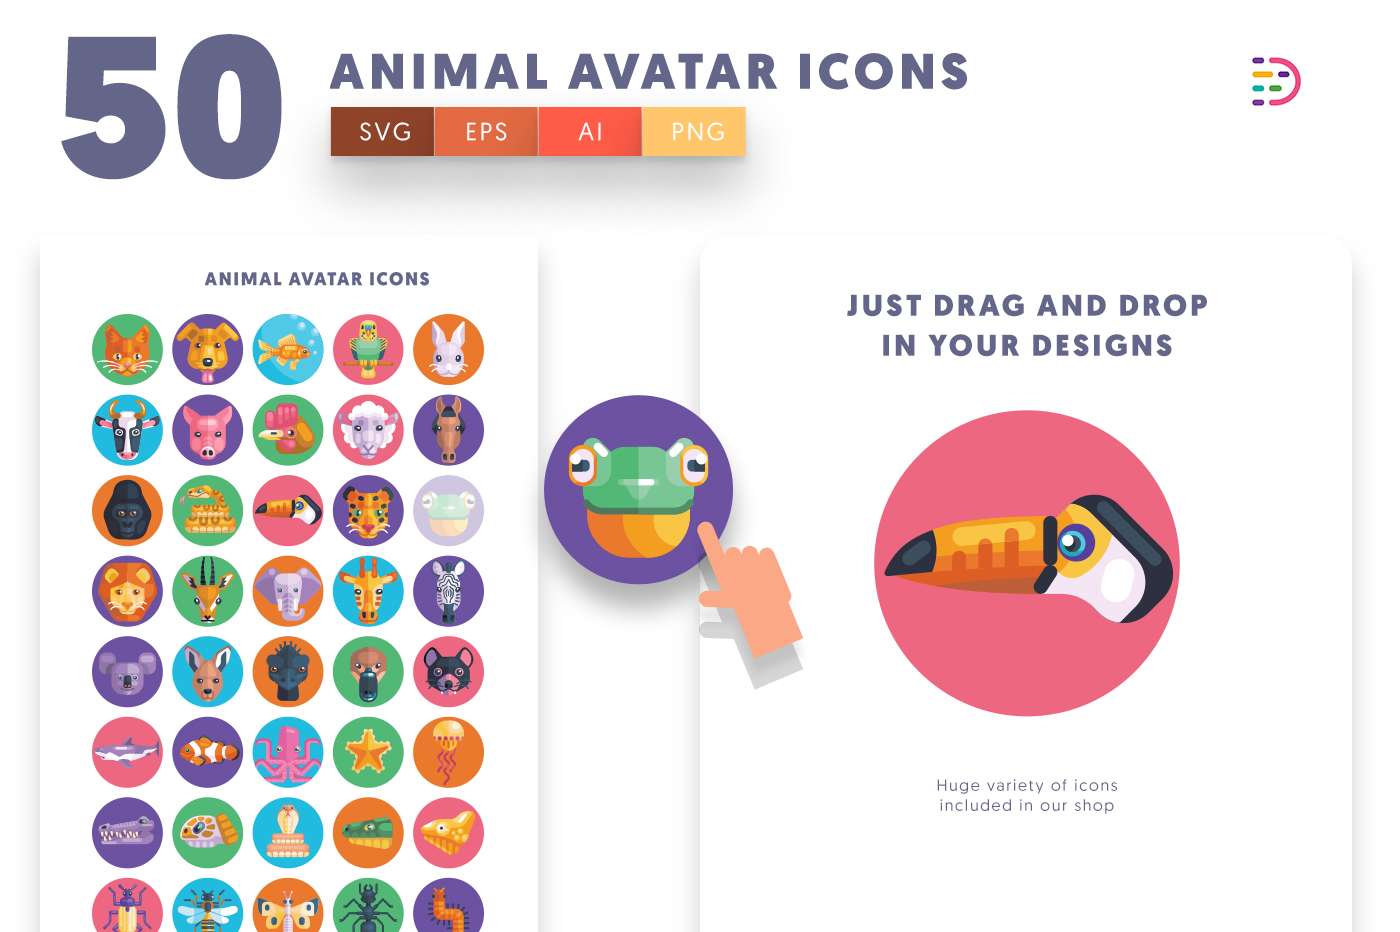 Drag and drop vector 50 Animal Avatar Icons